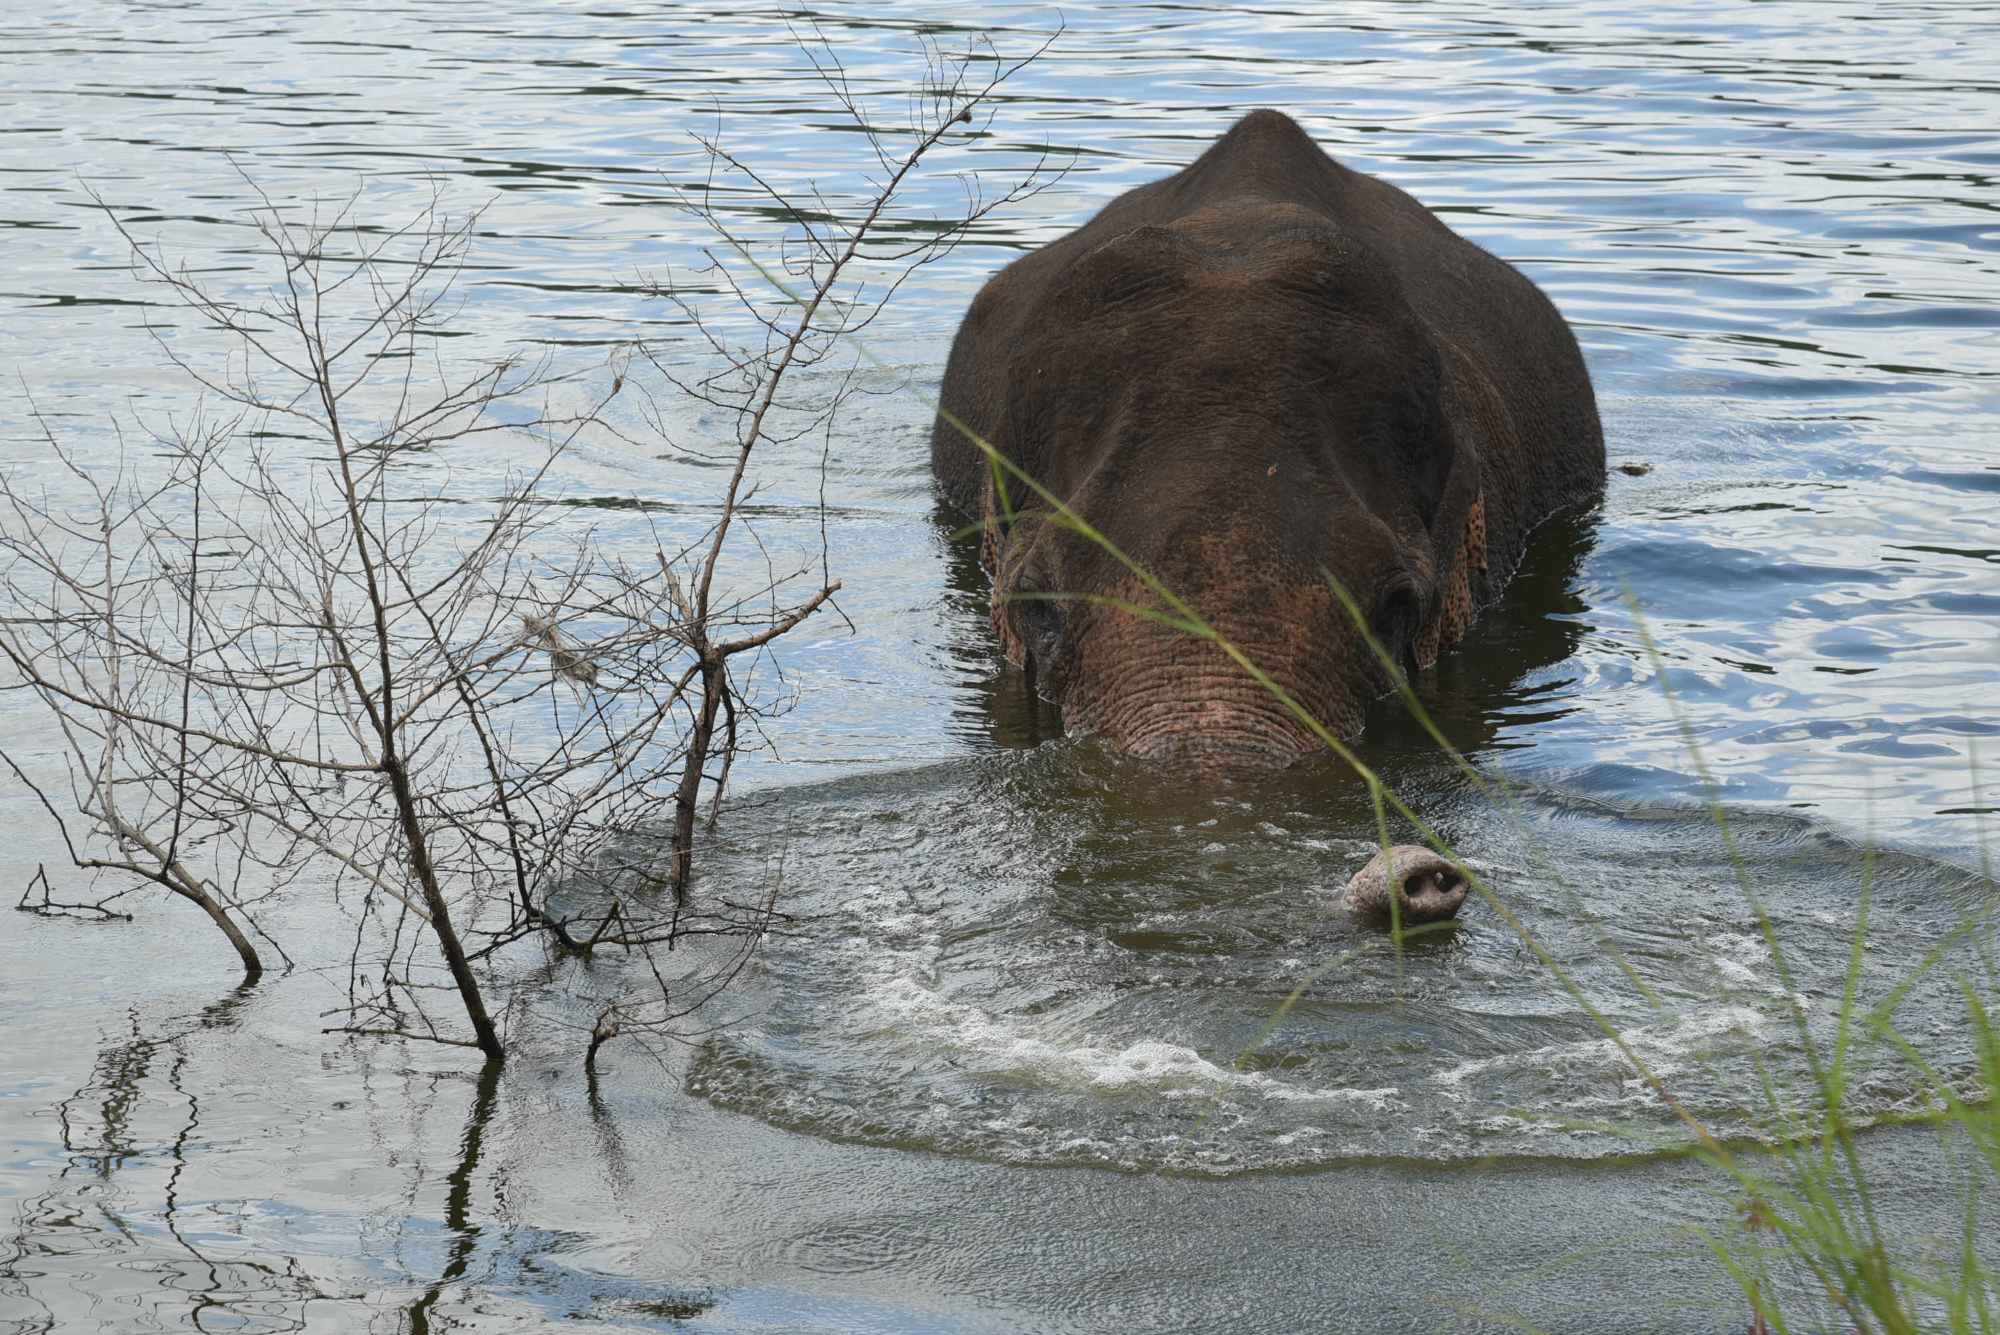 A severely injured wild elephant named Sidda took to the waters of a dam in Karnataka, India, for relief. Sidda had to be coaxed from the water for vital medical care.